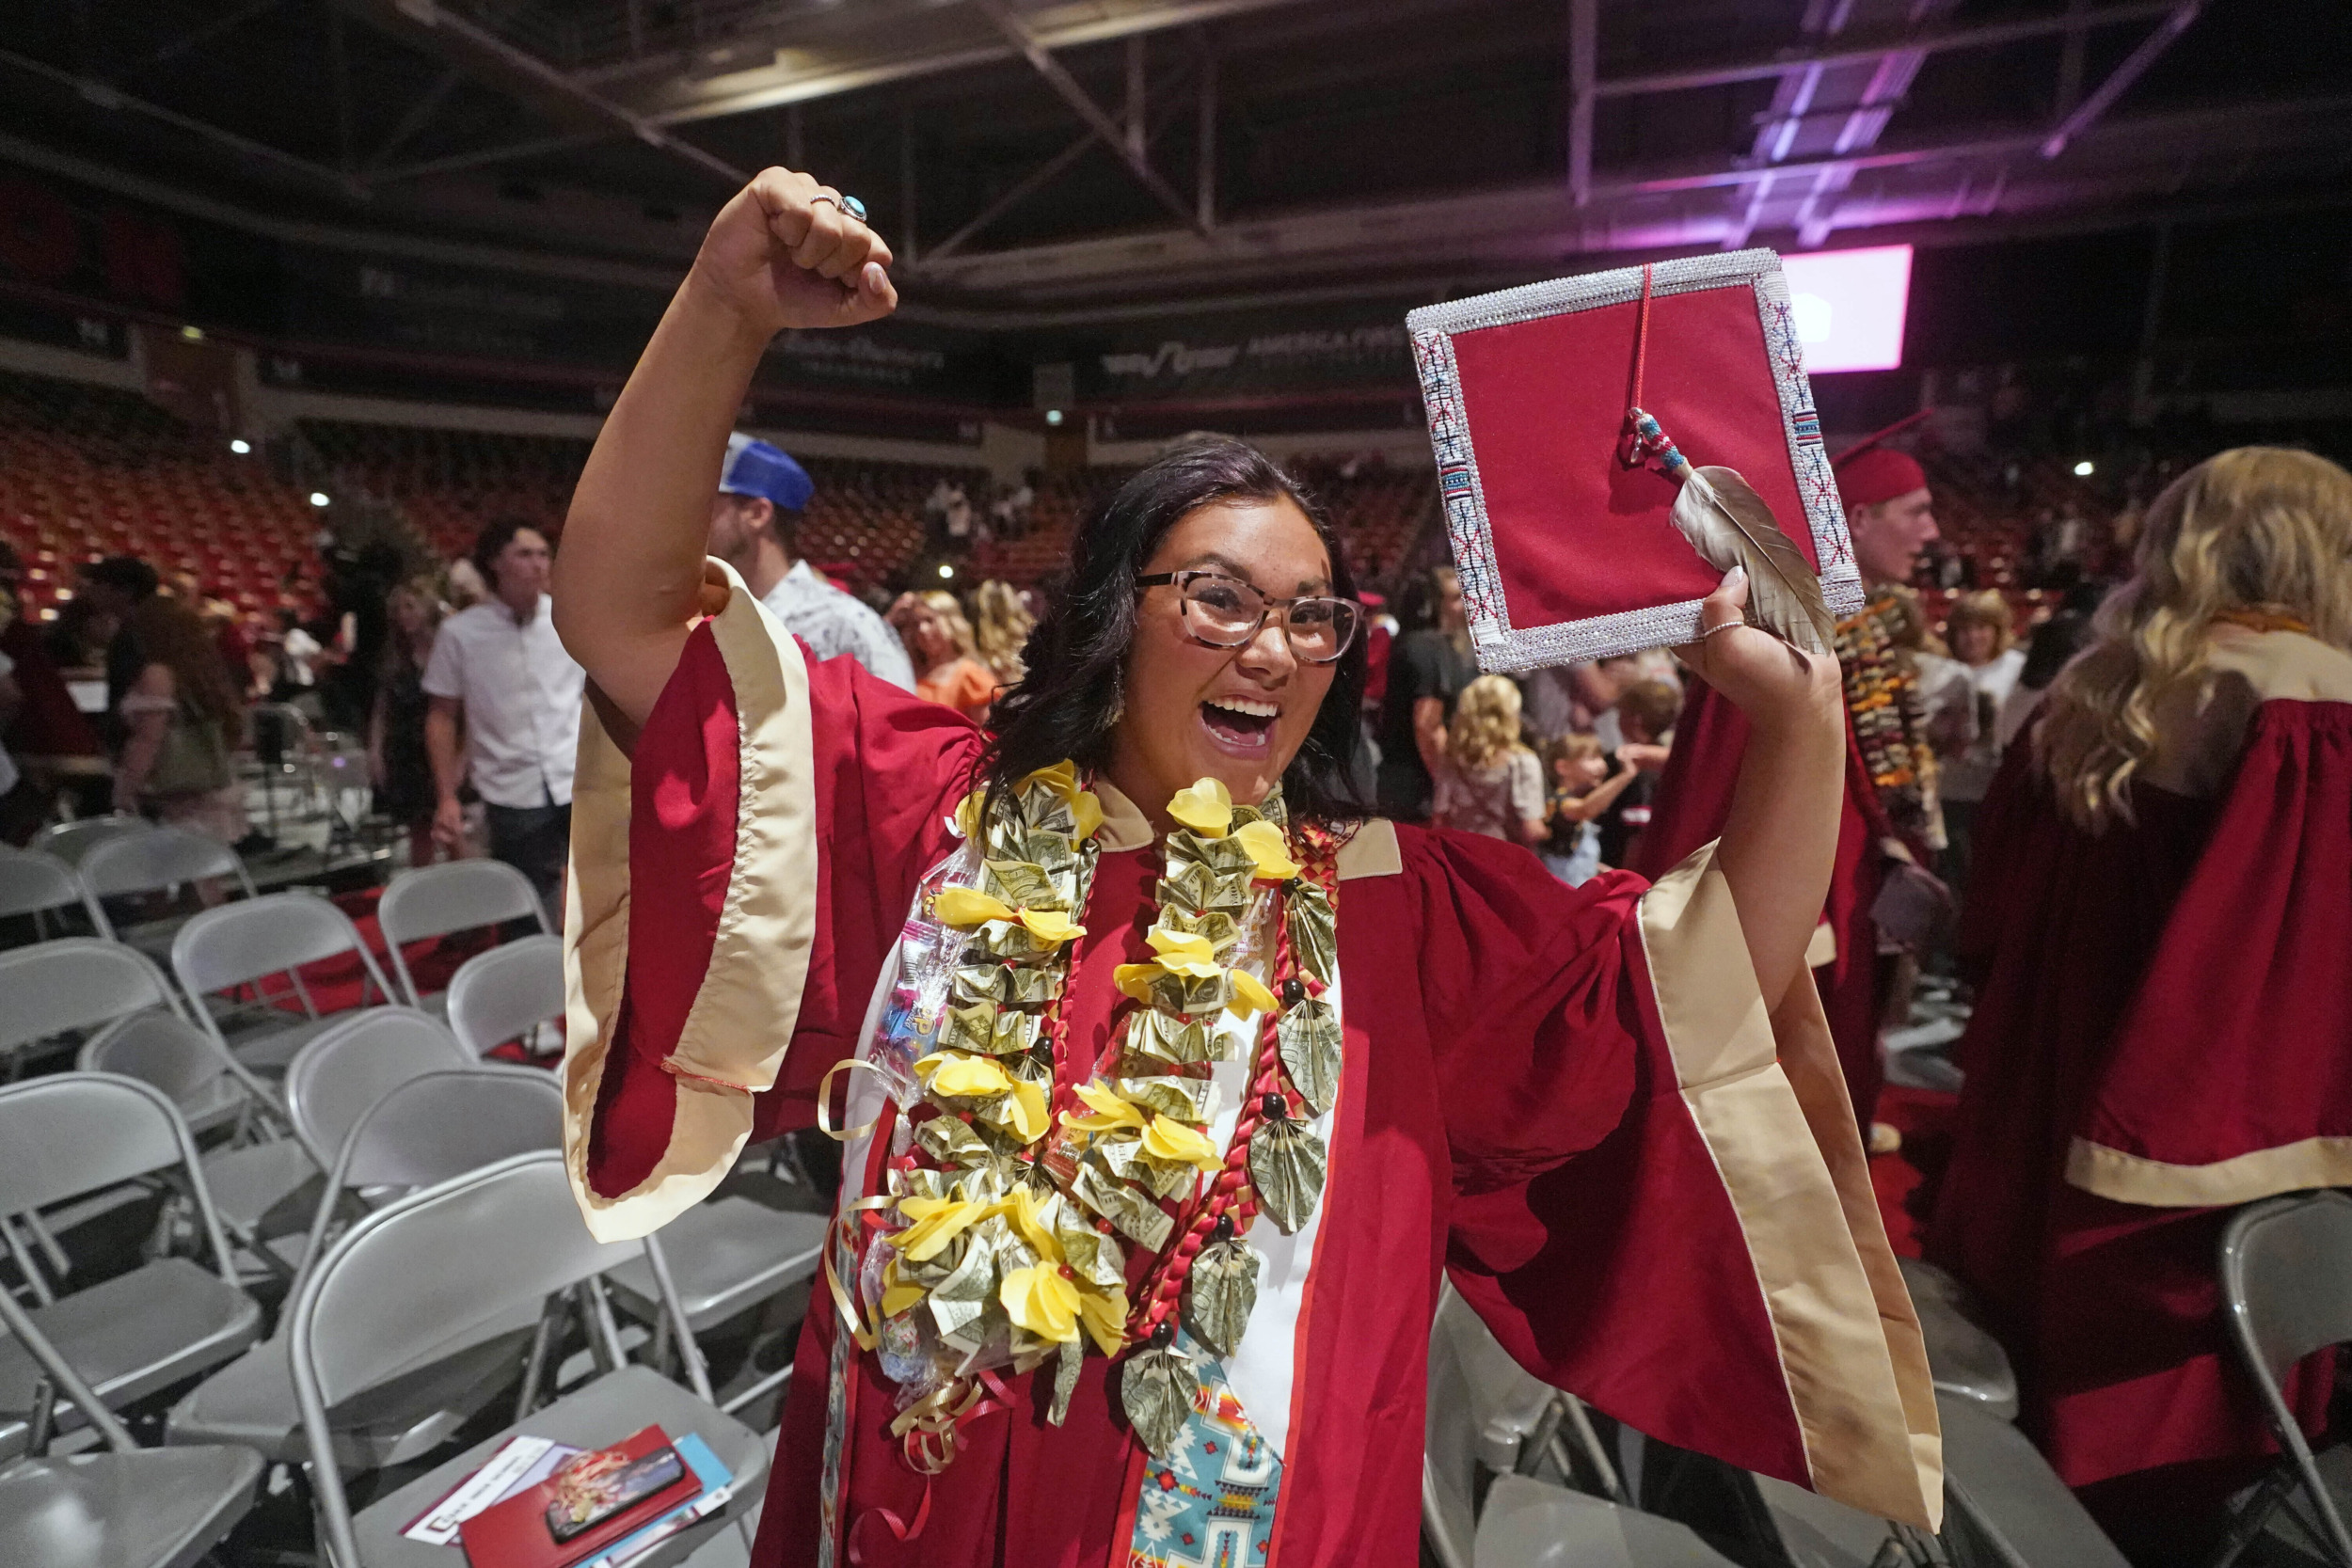 Indigenous Graduation Regalia: Young Native American teen in red cap and graduation robe raises hands with big smile on her face after receiving diploma.